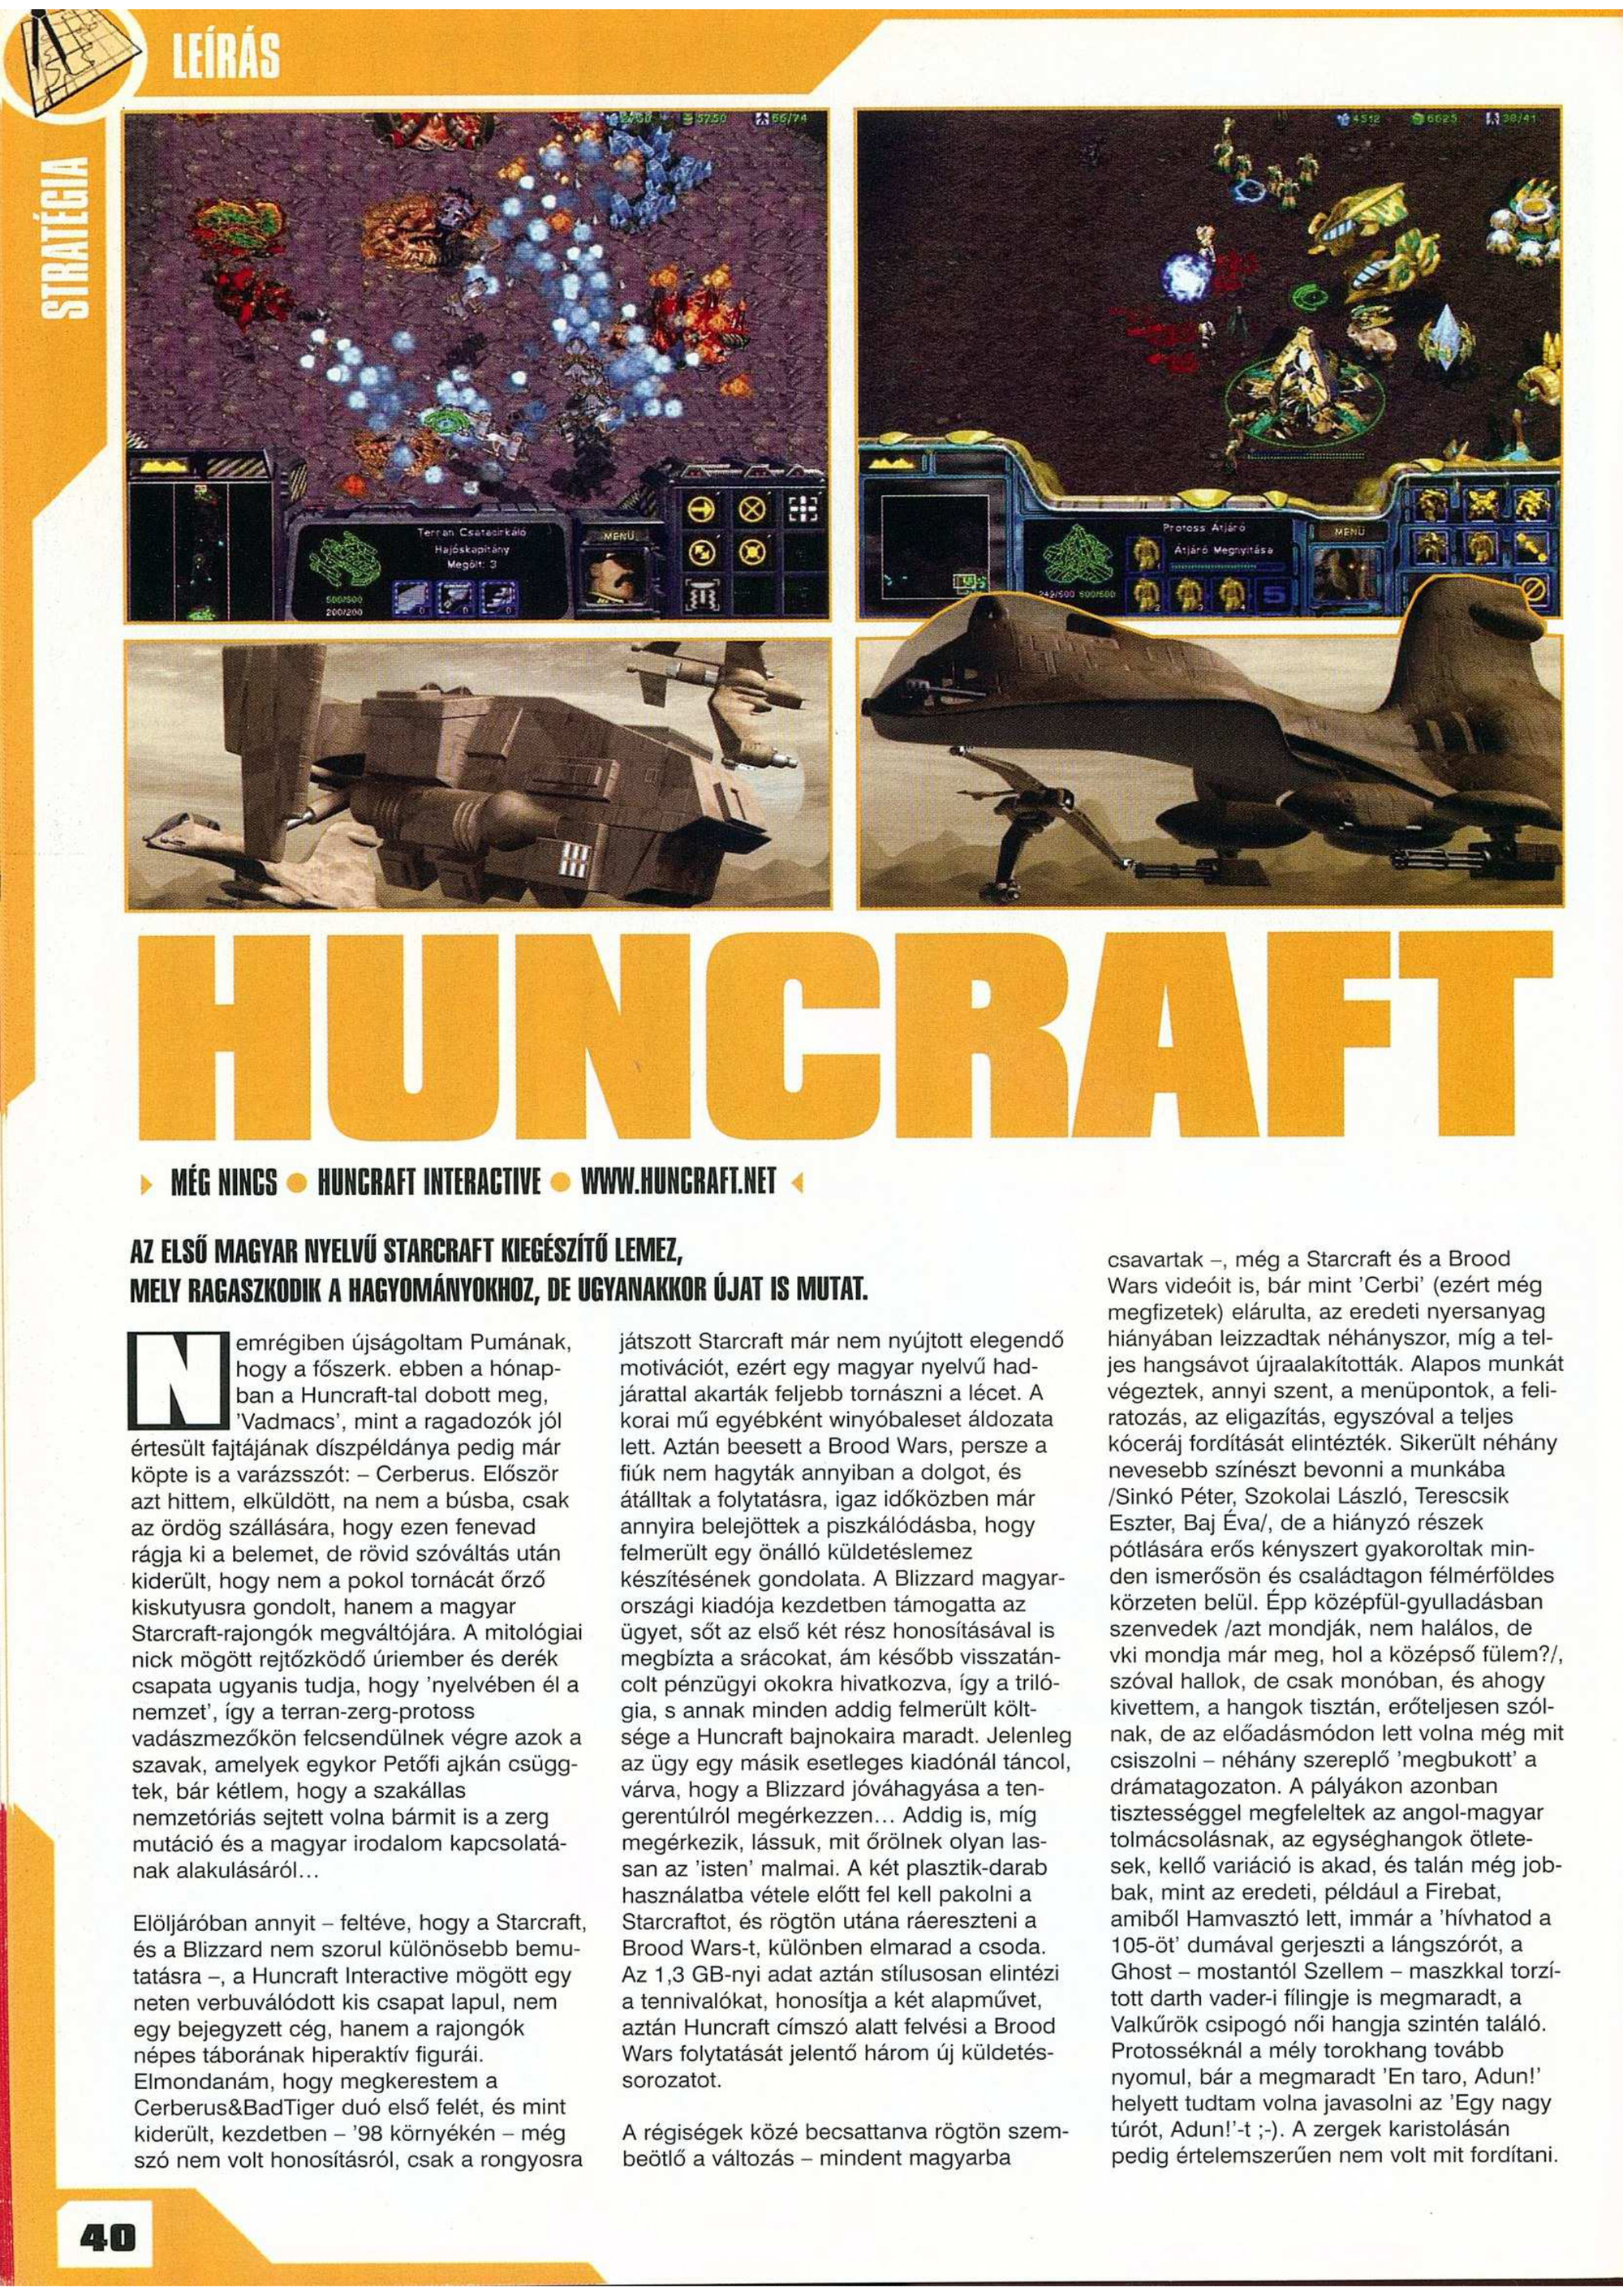 pcgames 2002 03 page 40 4mb